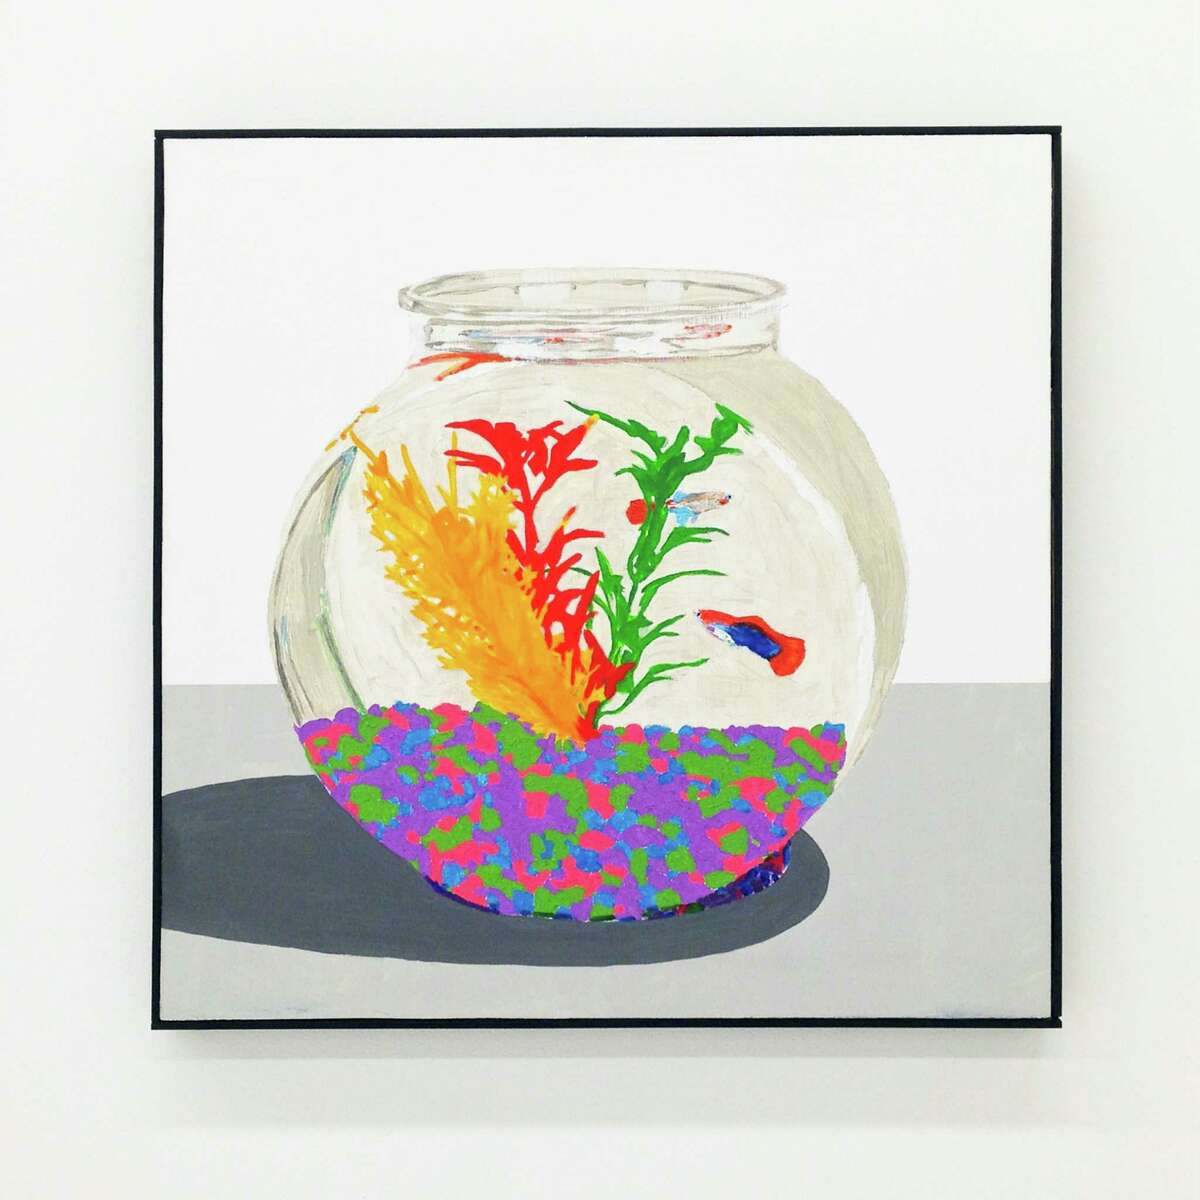 Bradley Kerl's "Aquarium" is on view in the group show "Summer Salts" at Art Palace.